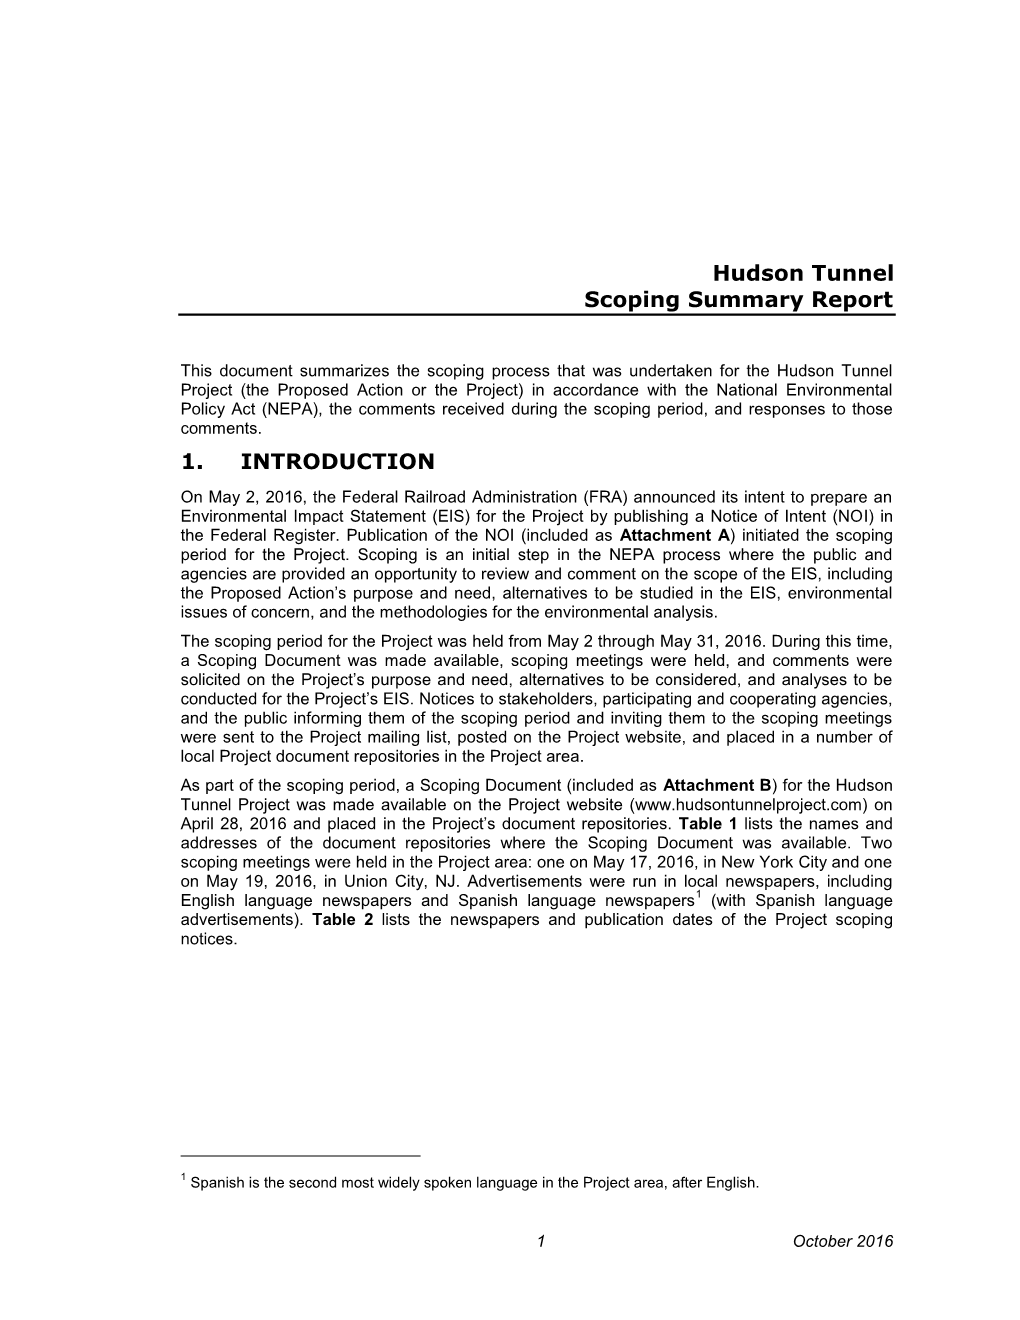 Hudson Tunnel Scoping Summary Report 1. INTRODUCTION